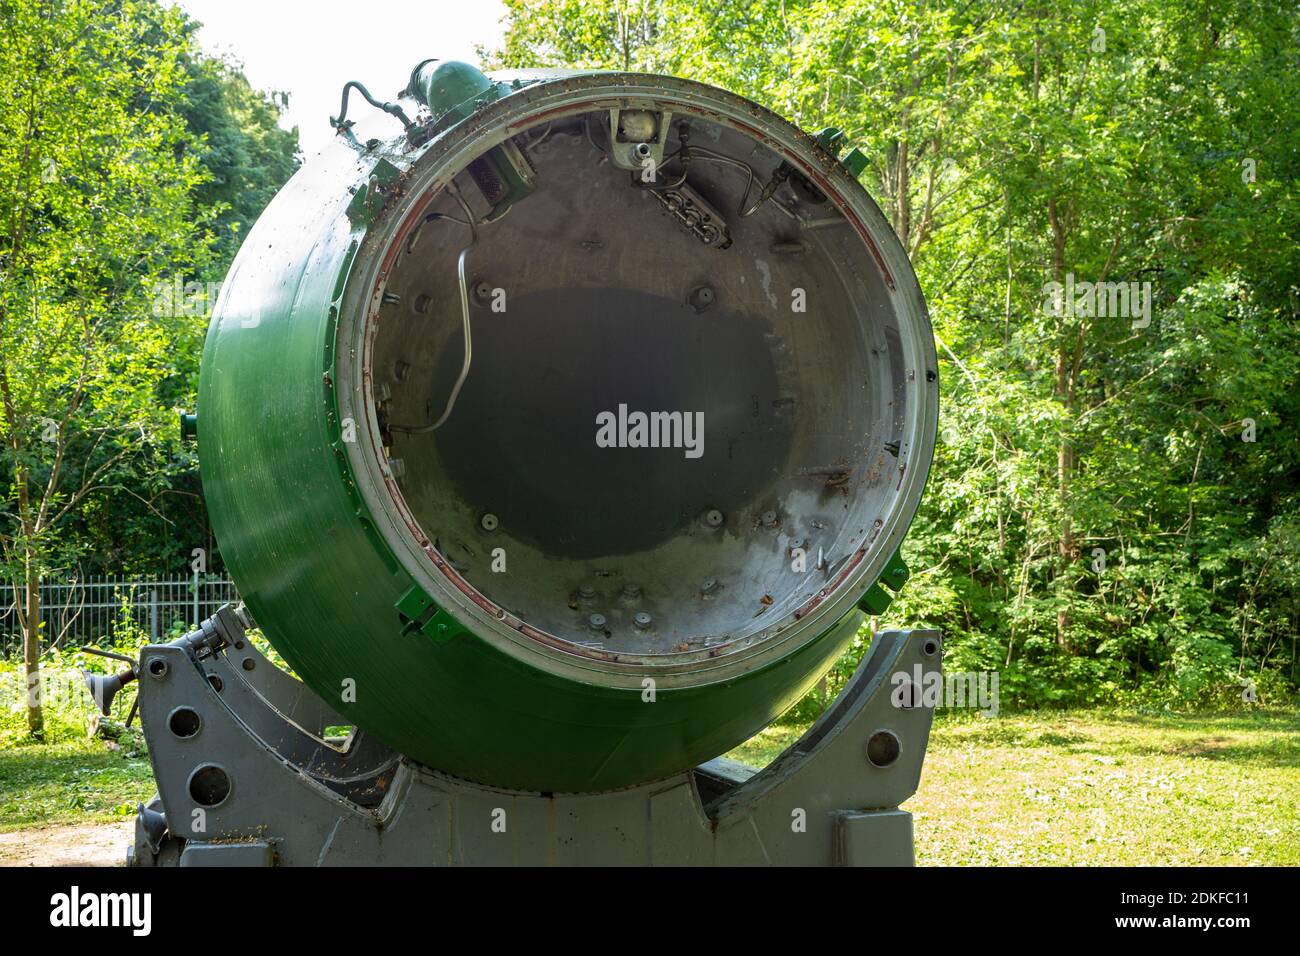 Pereslavl-Zalessky, Russia - July 25, 2018: Stage of soviet sea-based ballistic missile R-29 Vysota (SS-N-8, Sawfly, RSM-40) on a mobile platform  in Stock Photo